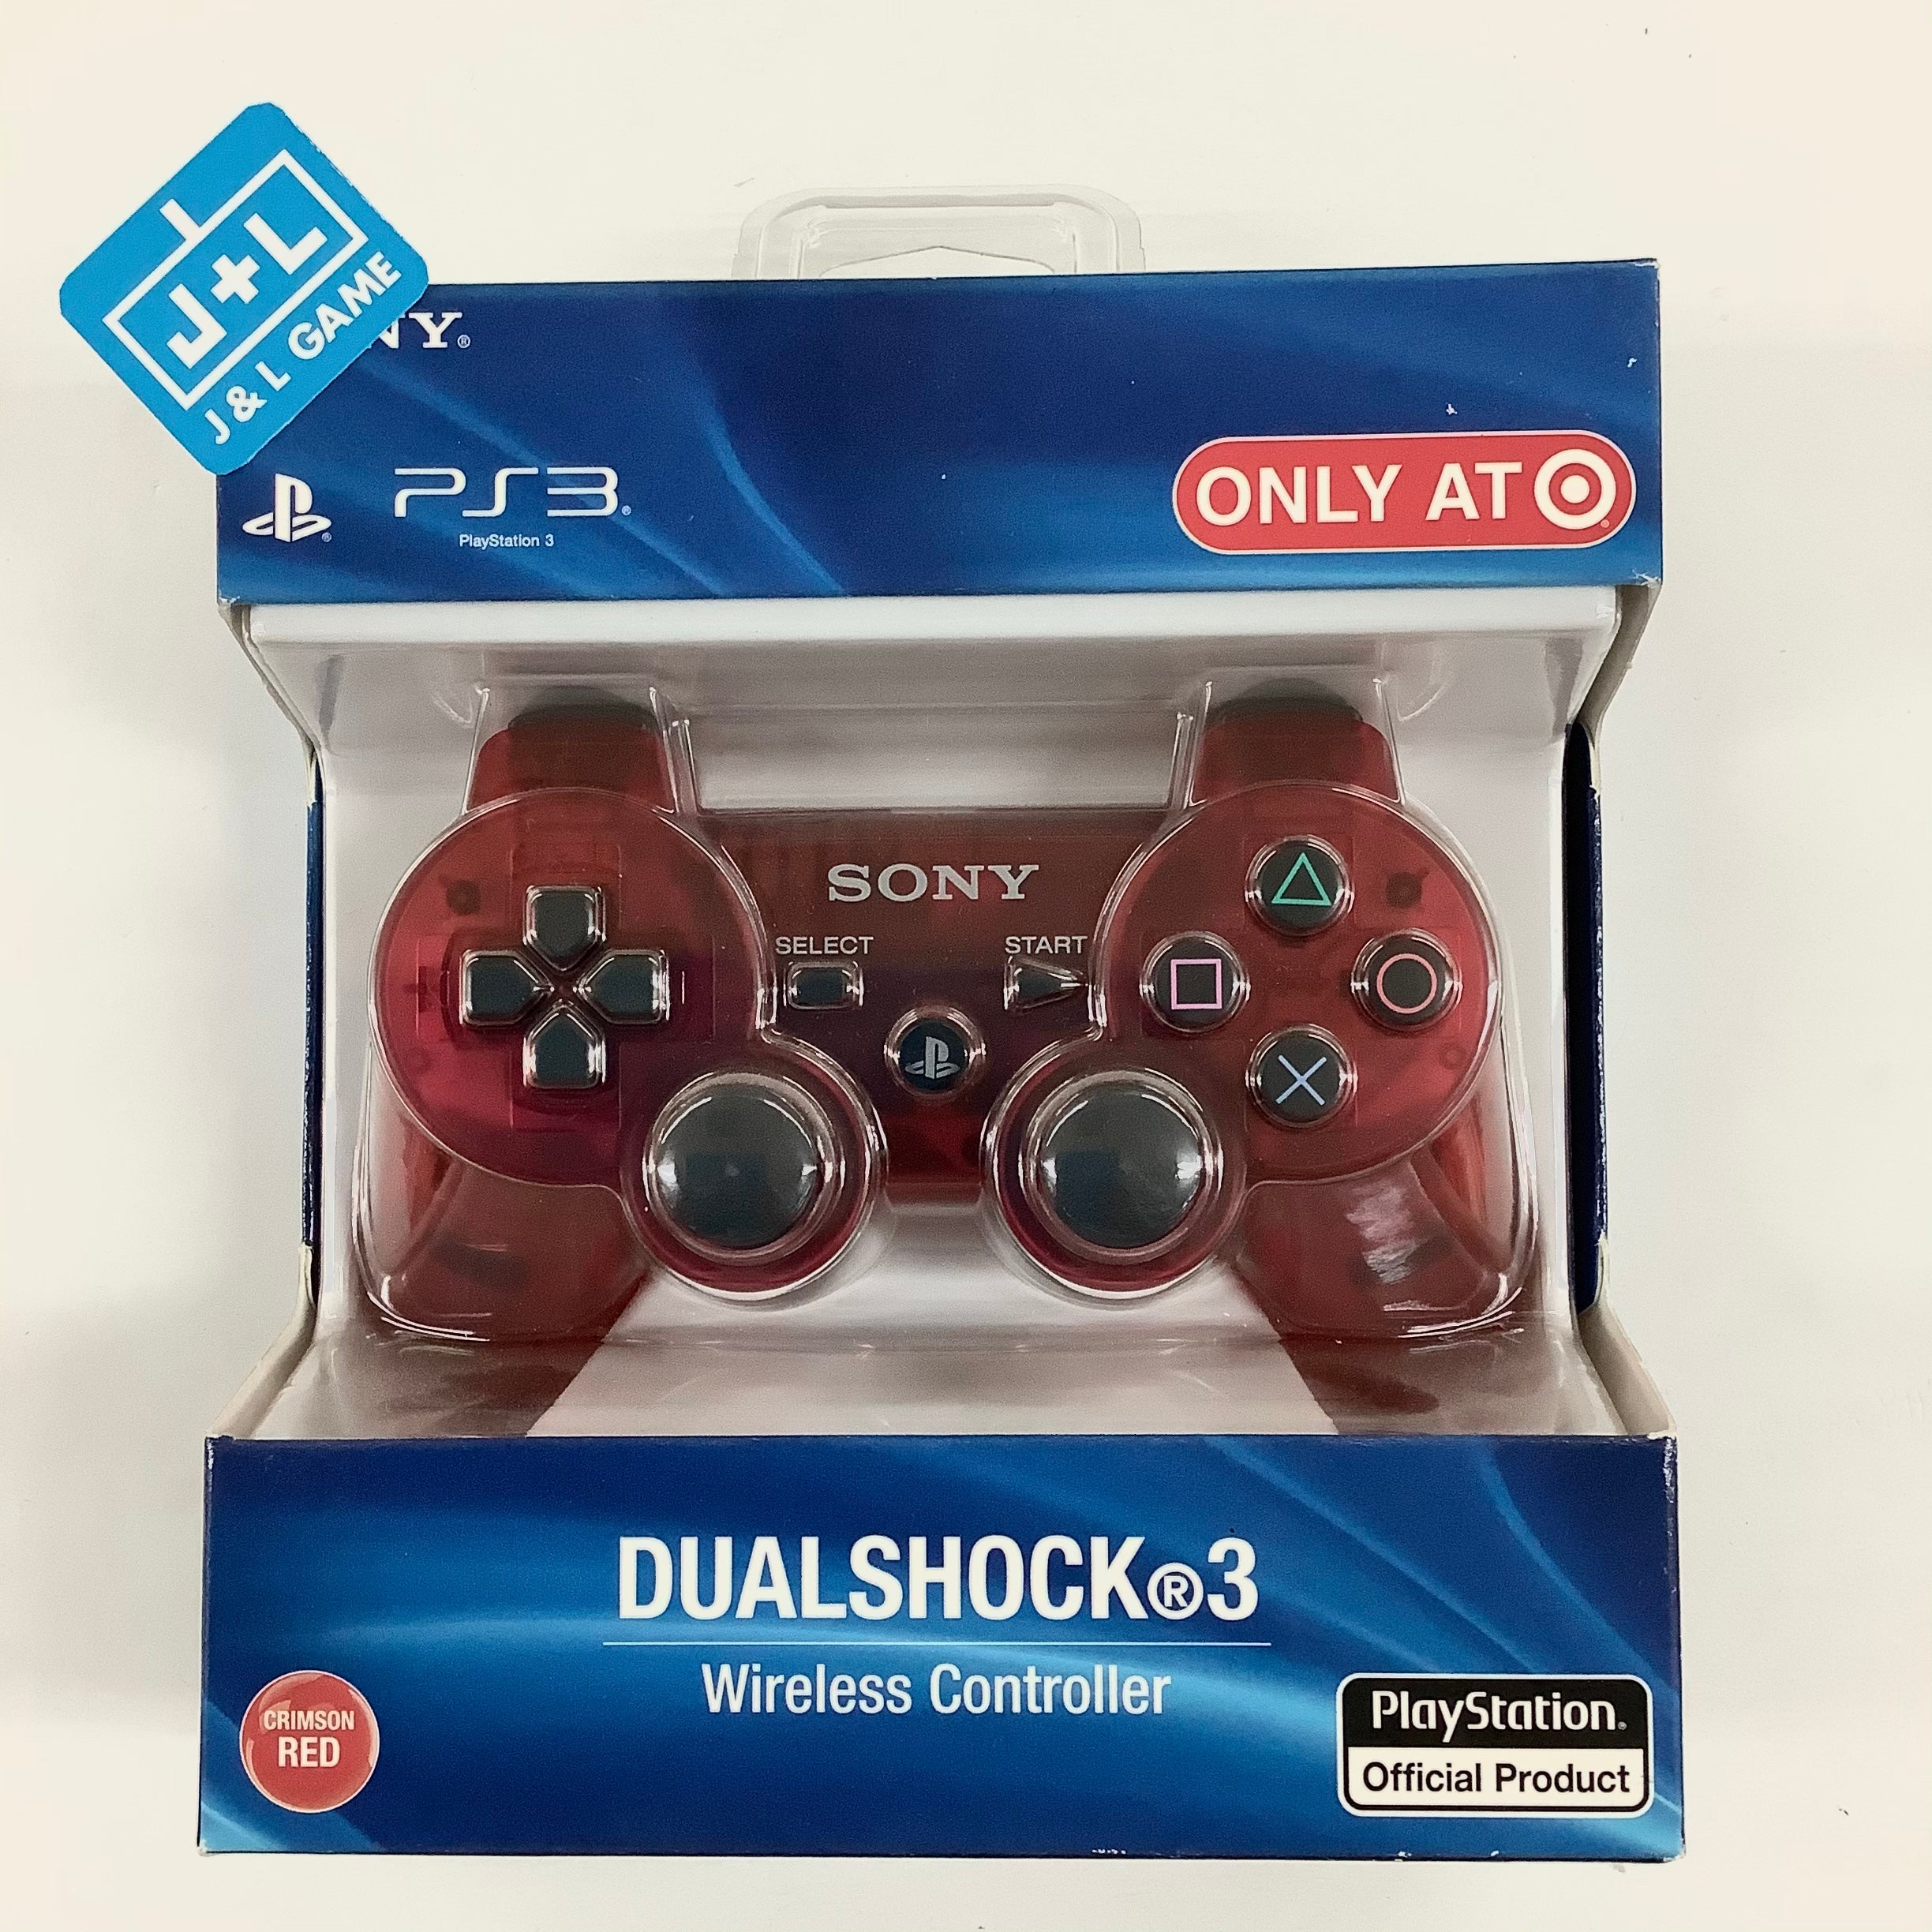 SONY PlayStation 3 Dualshock 3 Wireless Controller (Crimson Red) - (PS3) PlayStation 3 Accessories SONY   